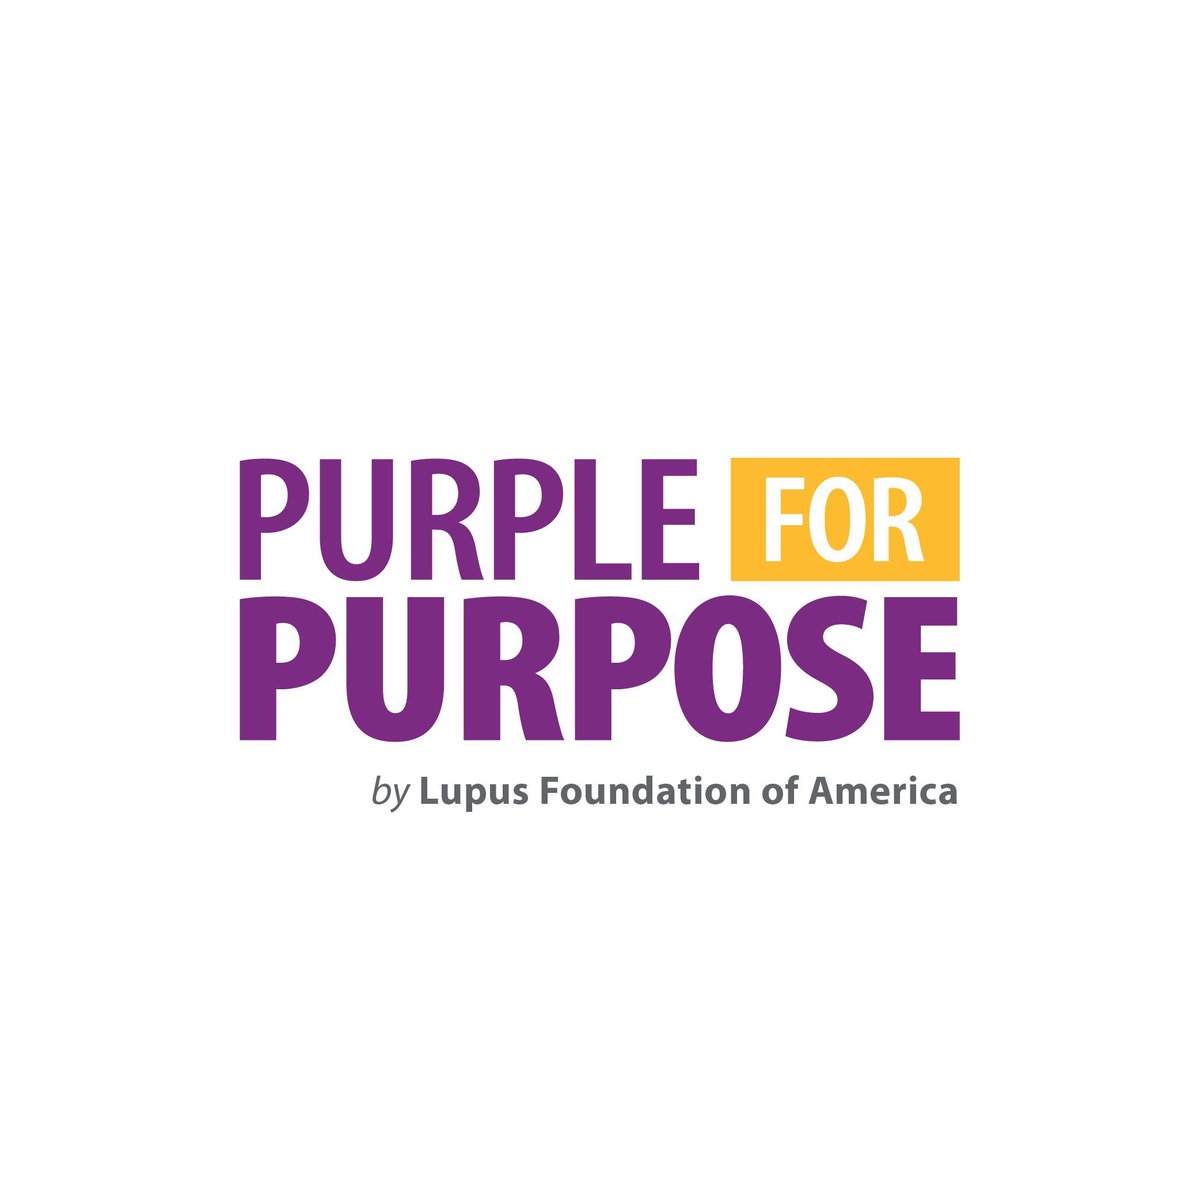 🚨 Calling all Corporate Partners! Join us in going Purple for Purpose this May! Let's raise awareness and funds to combat lupus. It's easy! Decide how your company can get involved, set a goal, and go Purple for Purpose! Sign up now at buff.ly/49zU3AJ.